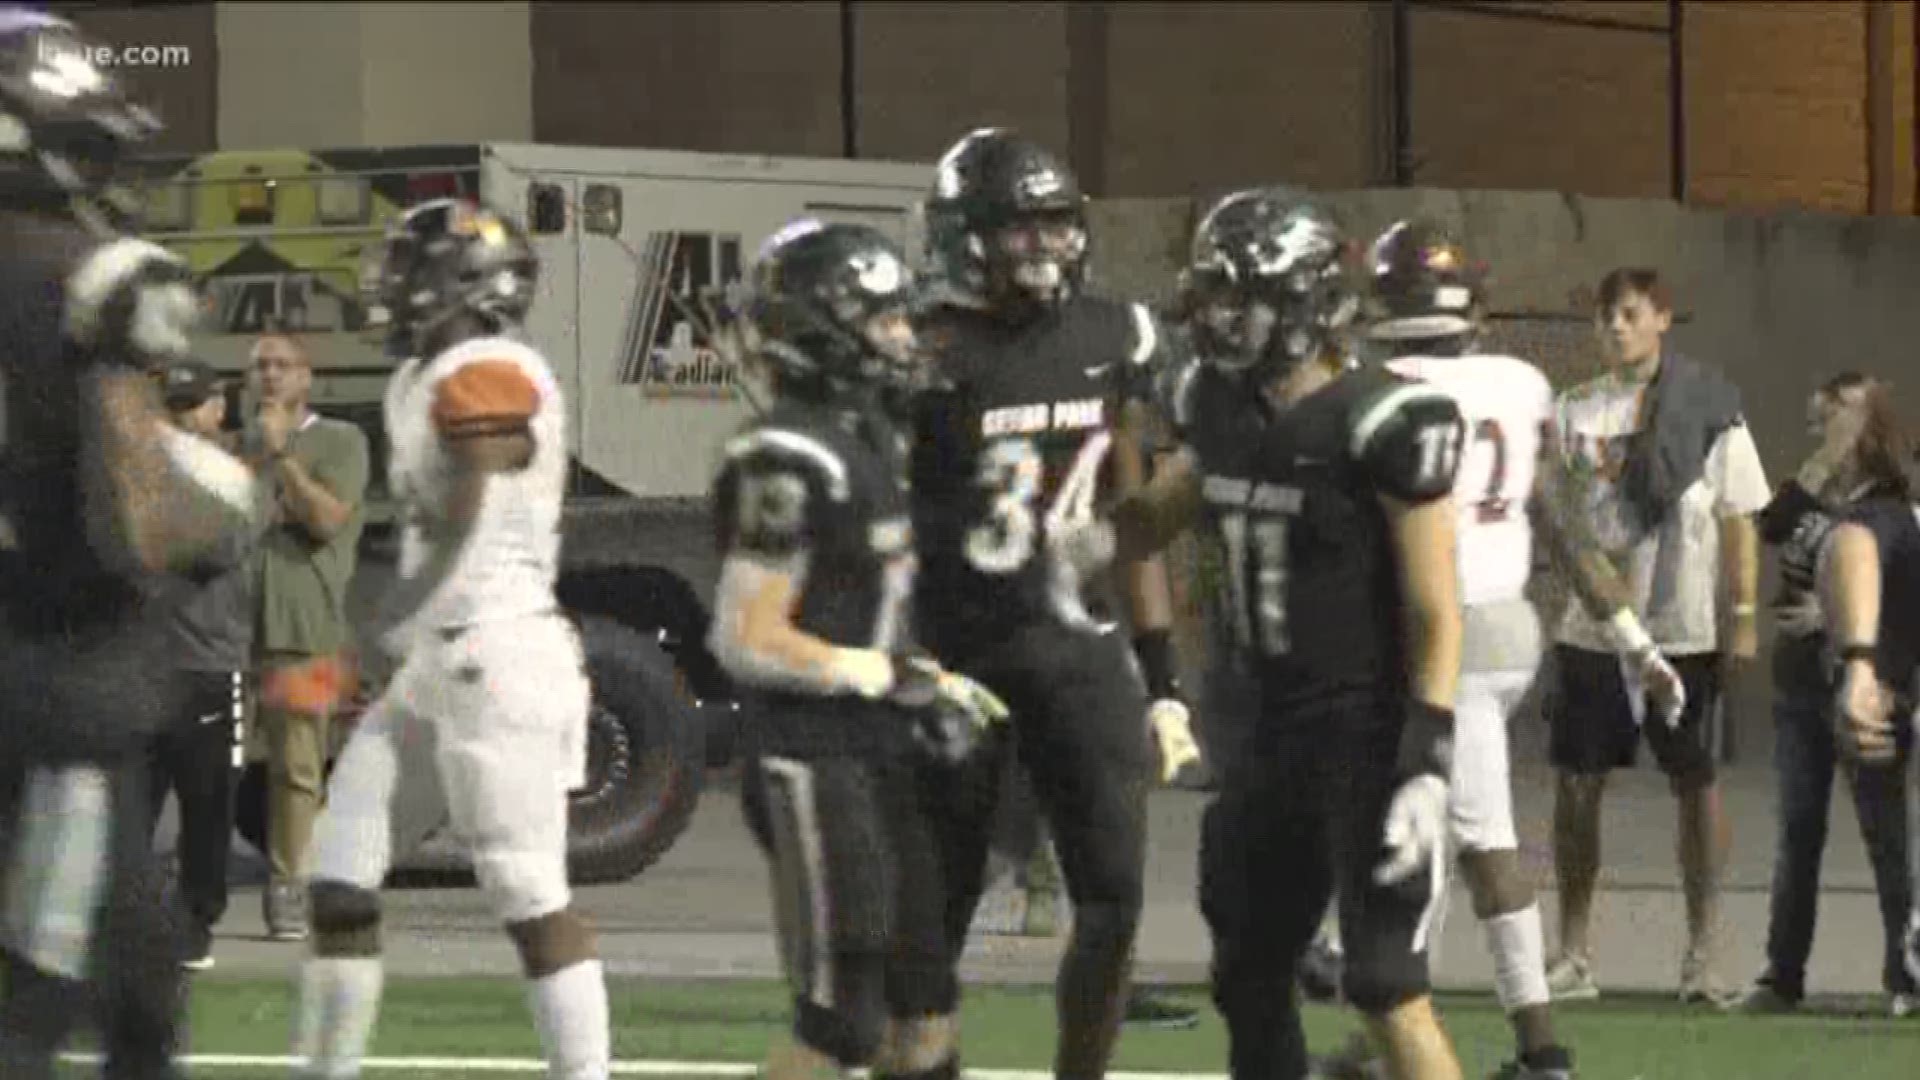 Friday's matchup between 6-1 Cedar Park and 5-0 Hutto is, for all intents and purposes, a battle for the district crown.